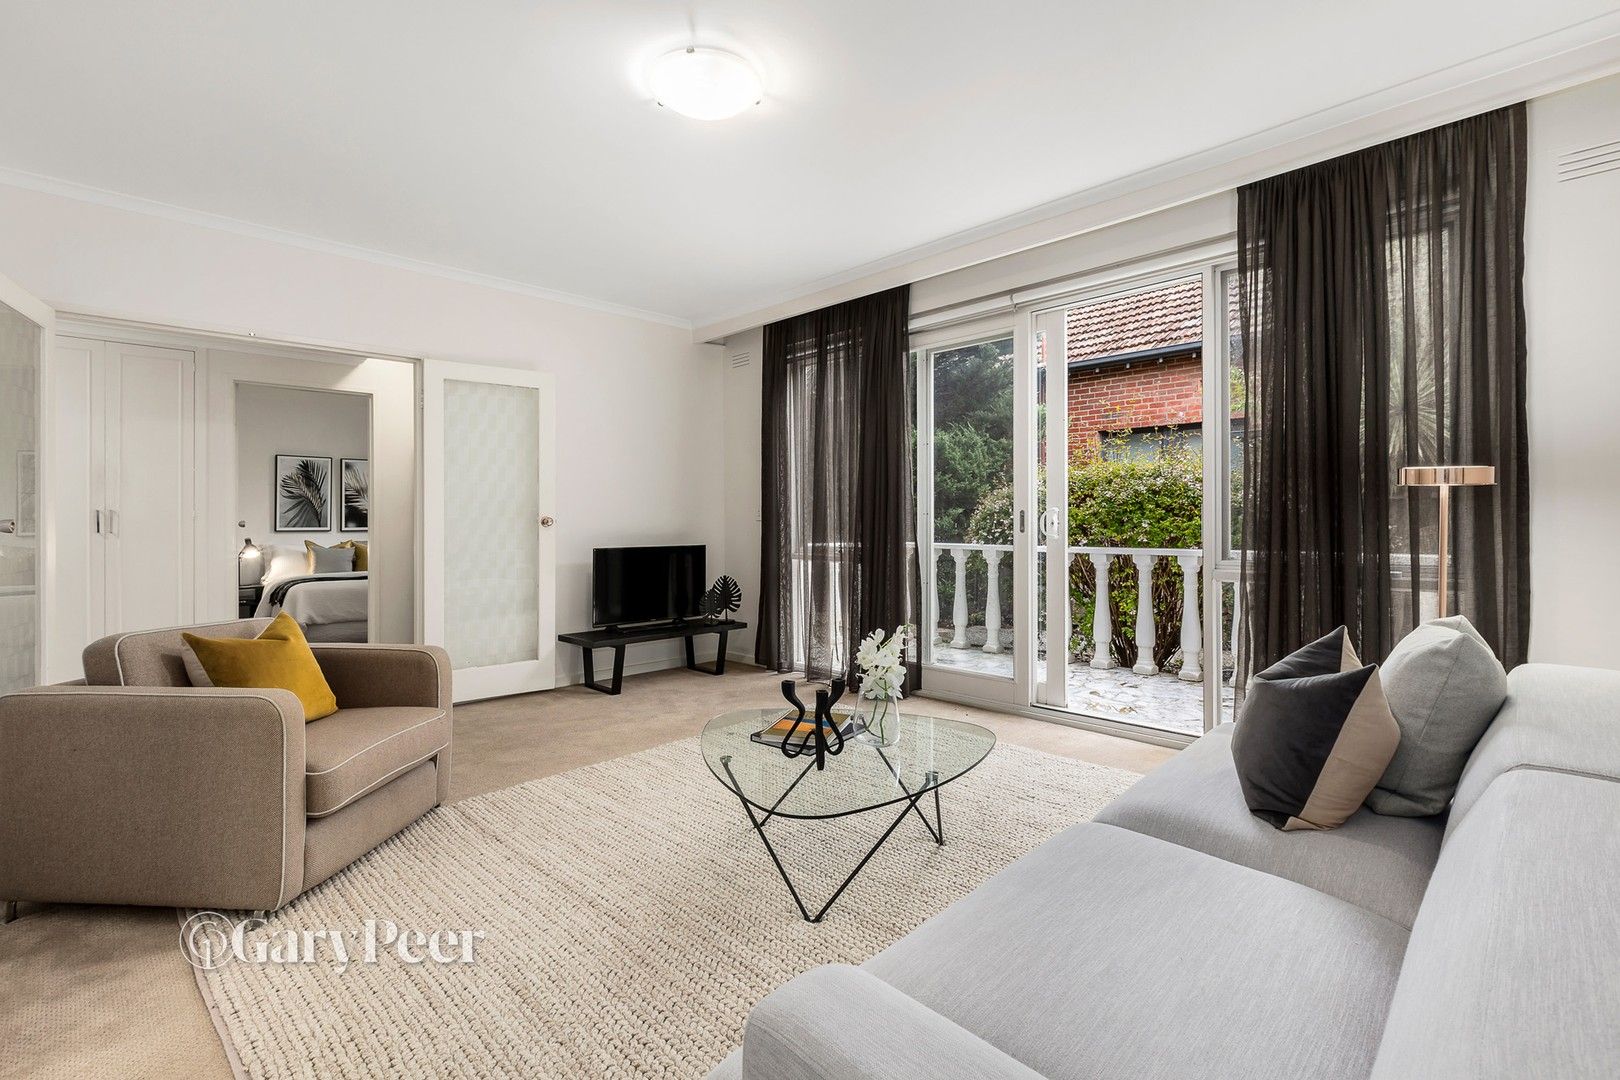 2 bedrooms Apartment / Unit / Flat in 1/14 Melby Avenue ST KILDA EAST VIC, 3183